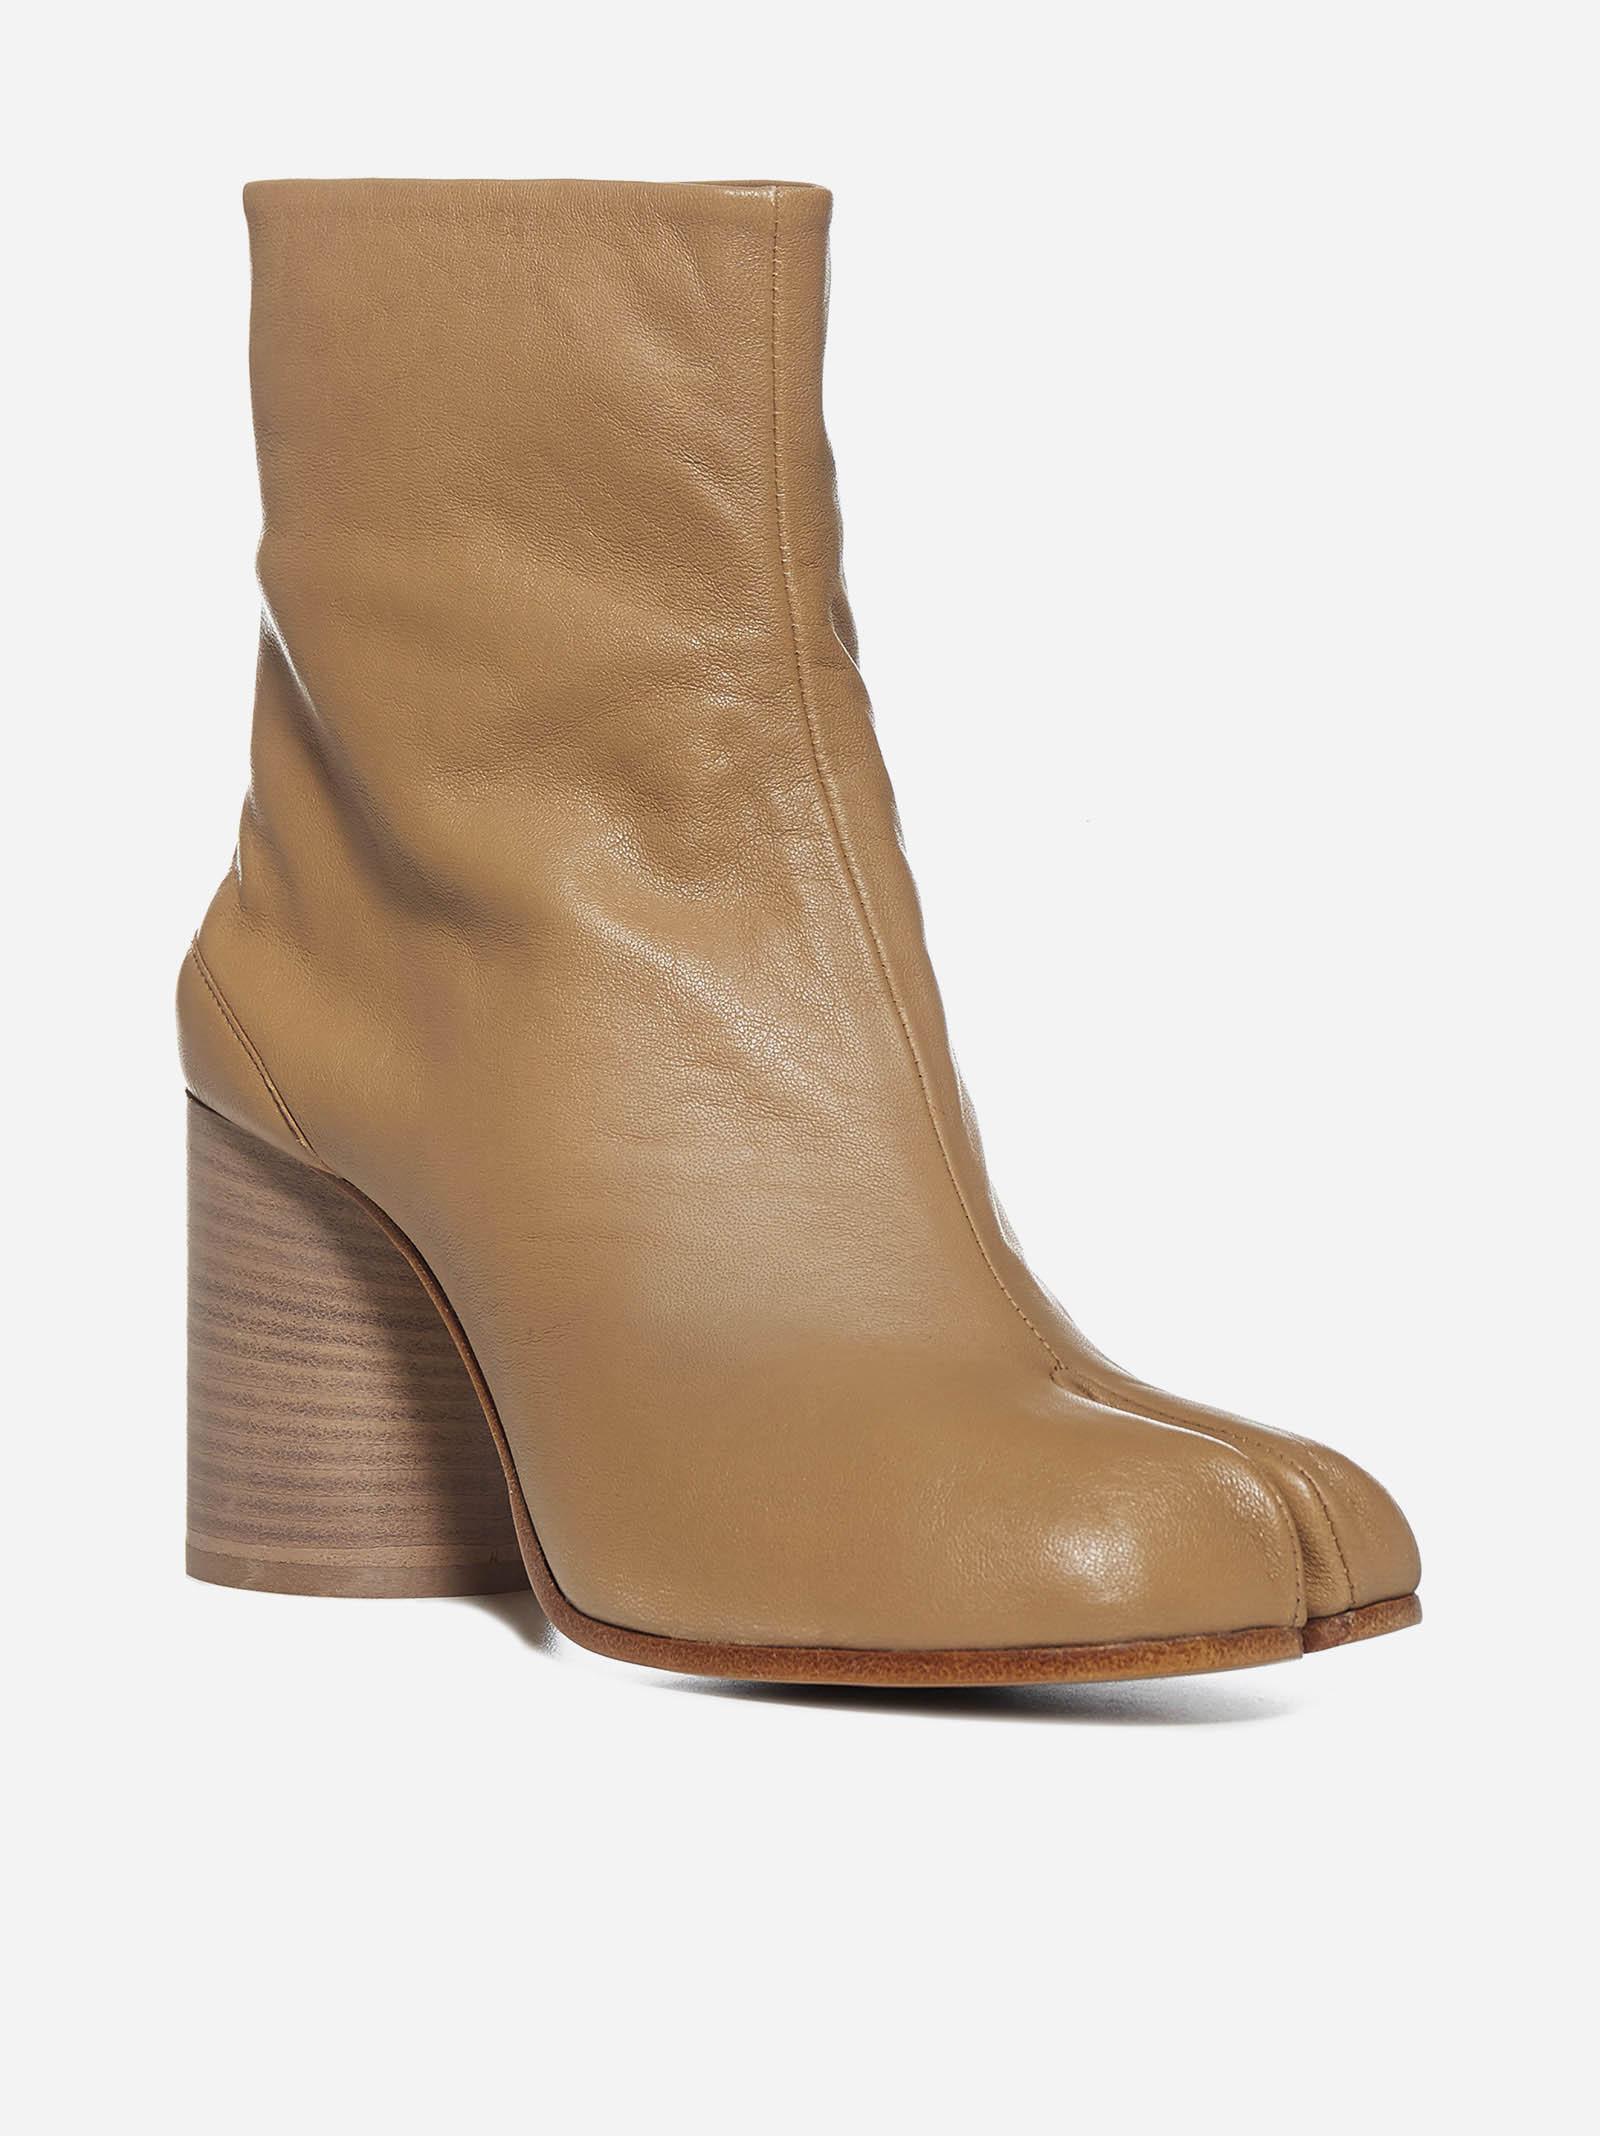 Maison Margiela Tabi Leather Ankle Boots in Brown - Lyst